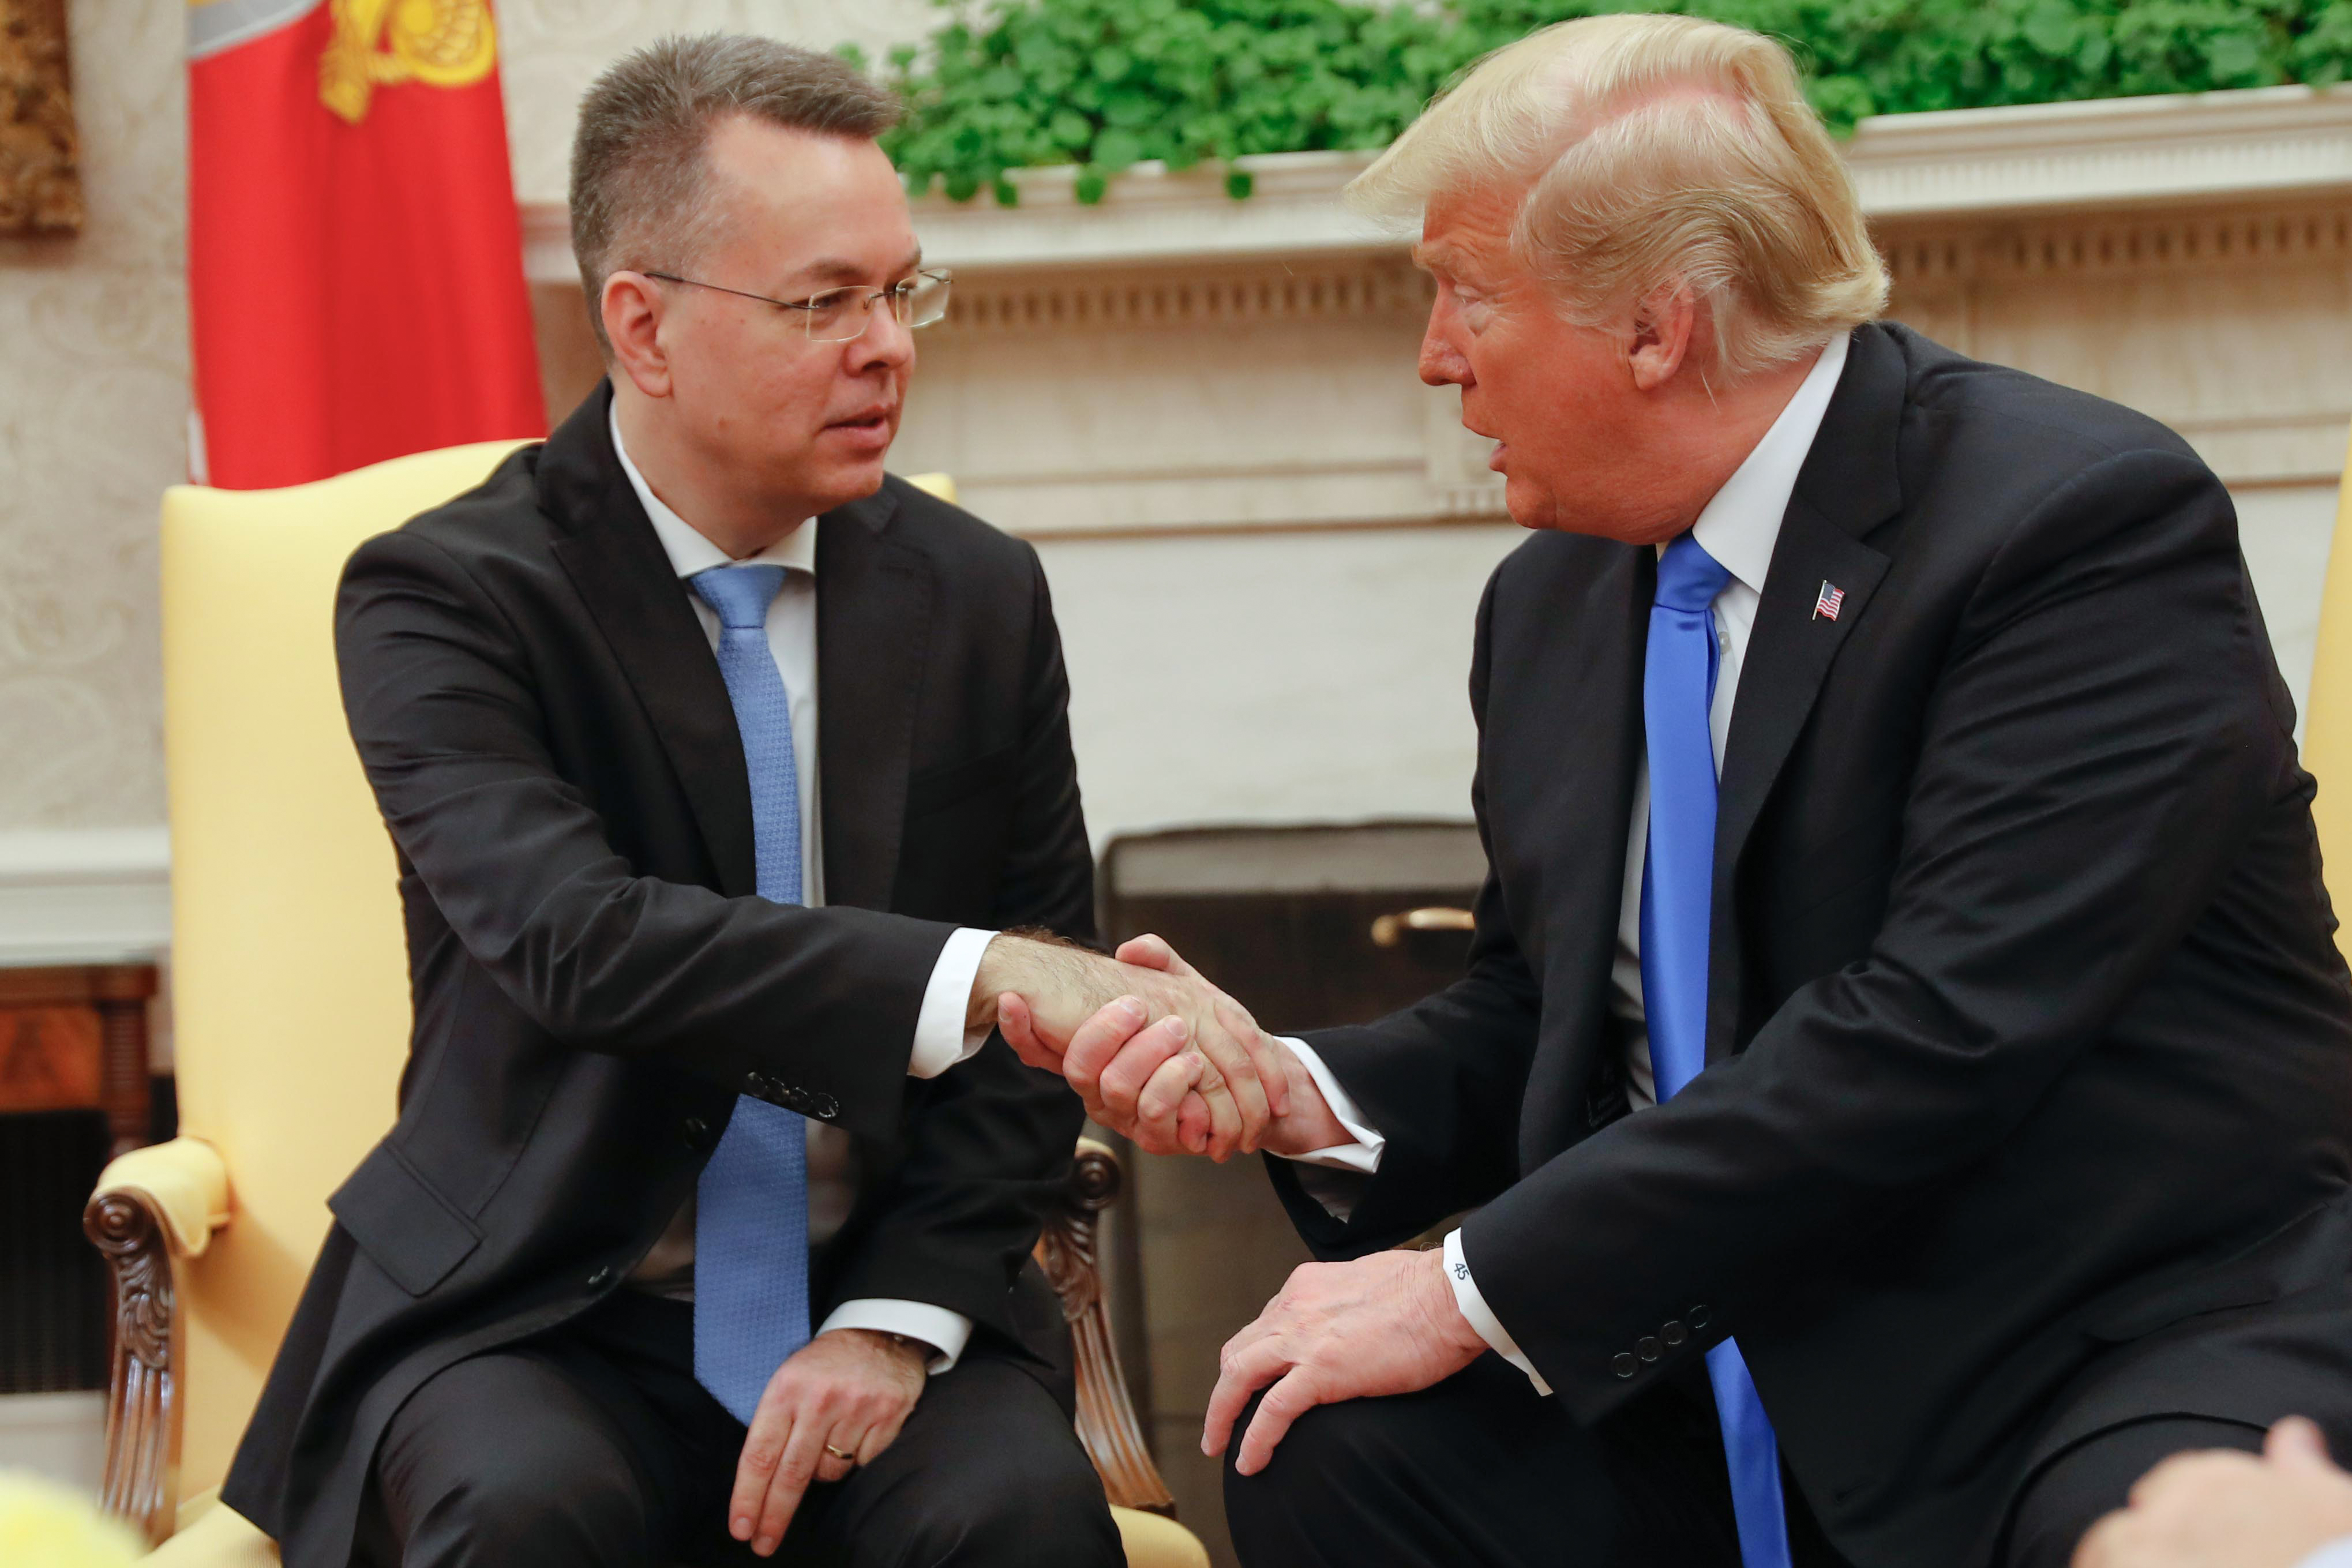 Freed American pastor Andrew Brunson (L) shakes hands with US President Donald Trump at the White House in Washington, DC, October 13, 2018. - Brunson, held for two years in Turkey, returned to the US earlier Saturday after a court freed him in a case that sparked a crisis in Ankara's ties with Washington and trouble for its economy. The court in the western town of Aliaga convicted Brunson on terror-related charges and sentenced him to three years, one month and 15 days in jail. (Photo by ROBERTO SCHMIDT / AFP) (Photo credit should read ROBERTO SCHMIDT/AFP/Getty Images)